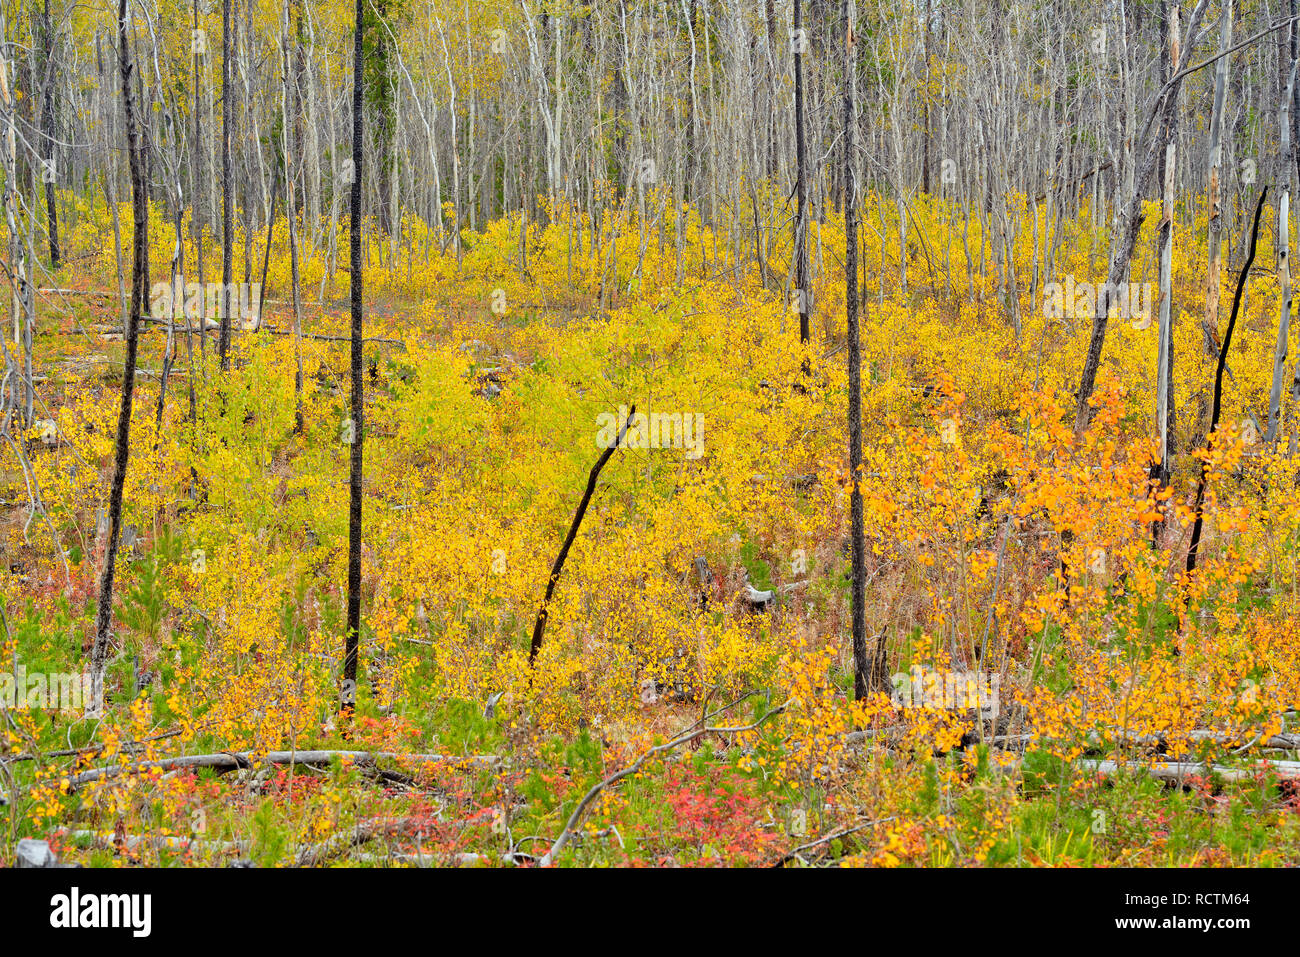 Aspen saplings in a regenerating forest fire zone, Hwy 3 North to Yellowknife, Northwest Territories, Canada Stock Photo